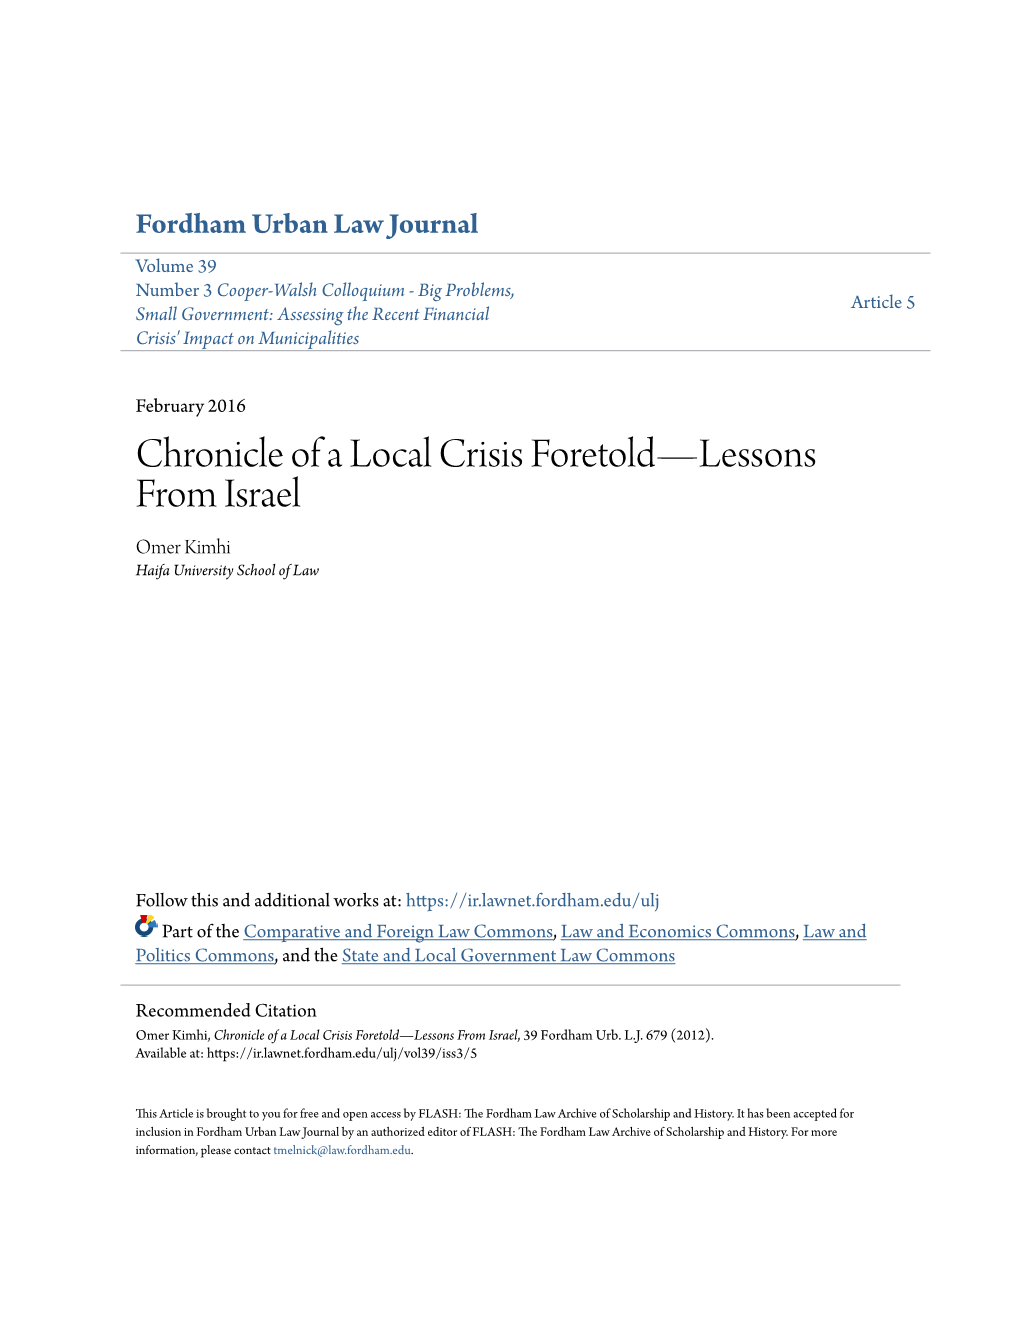 Chronicle of a Local Crisis Foretold—Lessons from Israel Omer Kimhi Haifa University School of Law